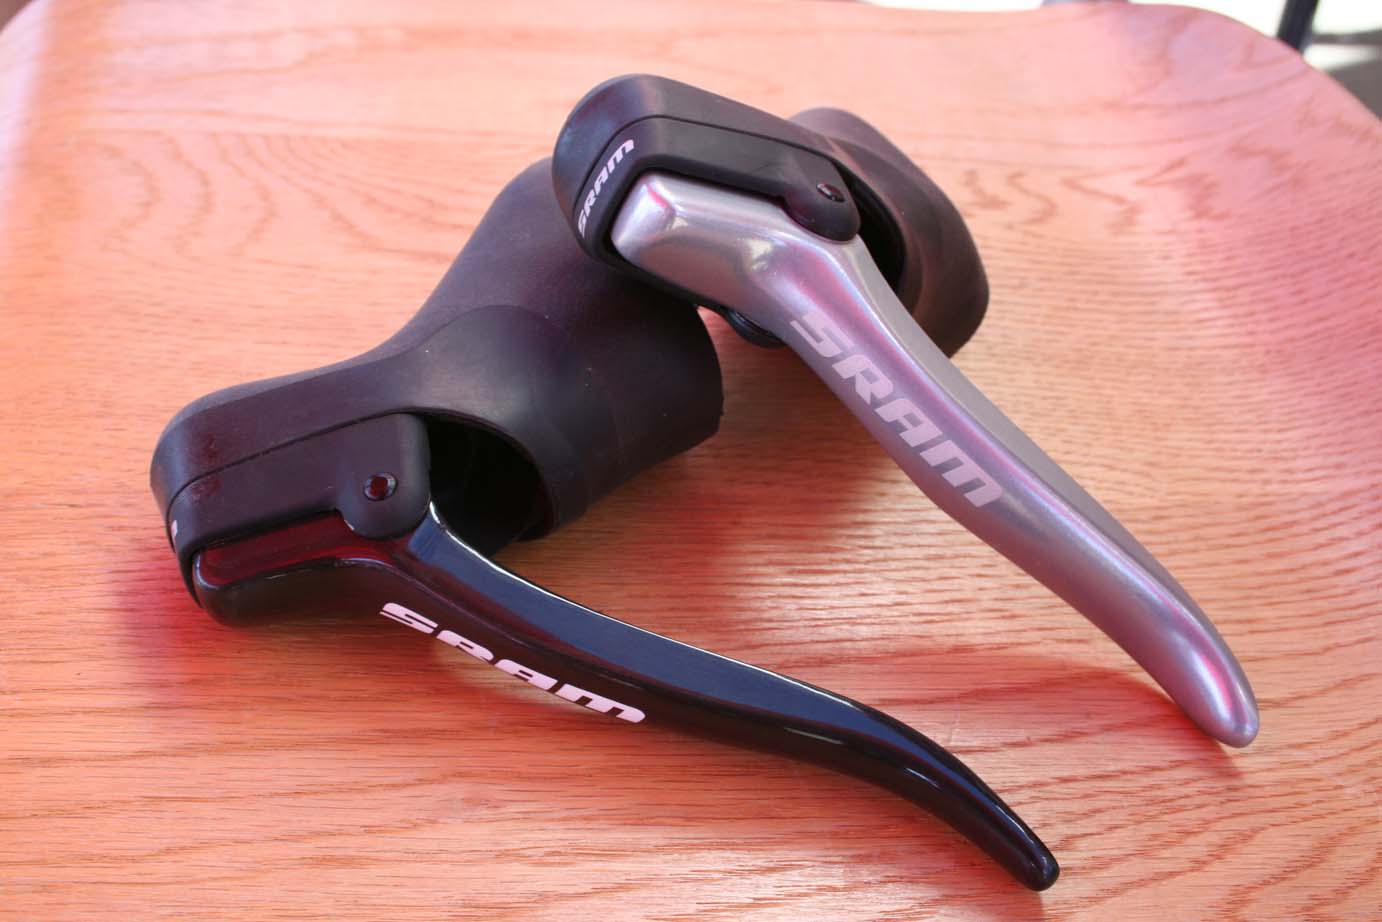 Single ring riders and singlespeeders\' requests have been heeded. Carbon and aluminum levers are finally available.